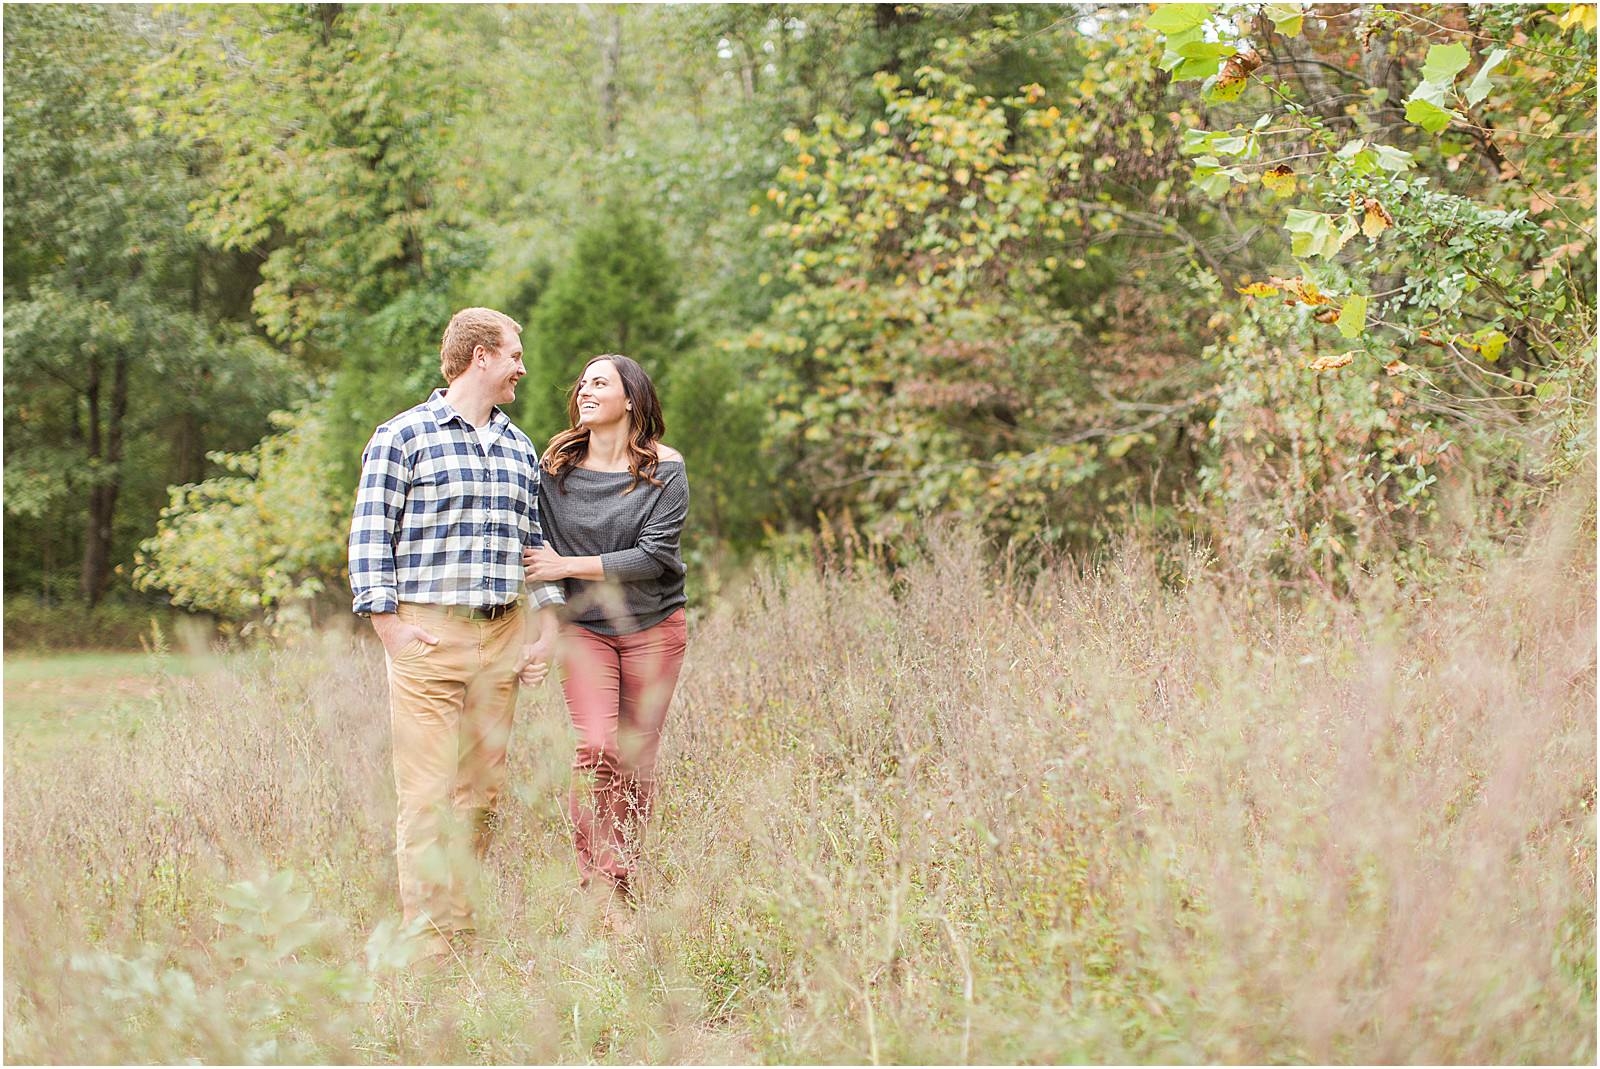 A Lincoln State Park Engagemtent Session | Deidra and Andrew | Bret and Brandie Photography 0007.jpg